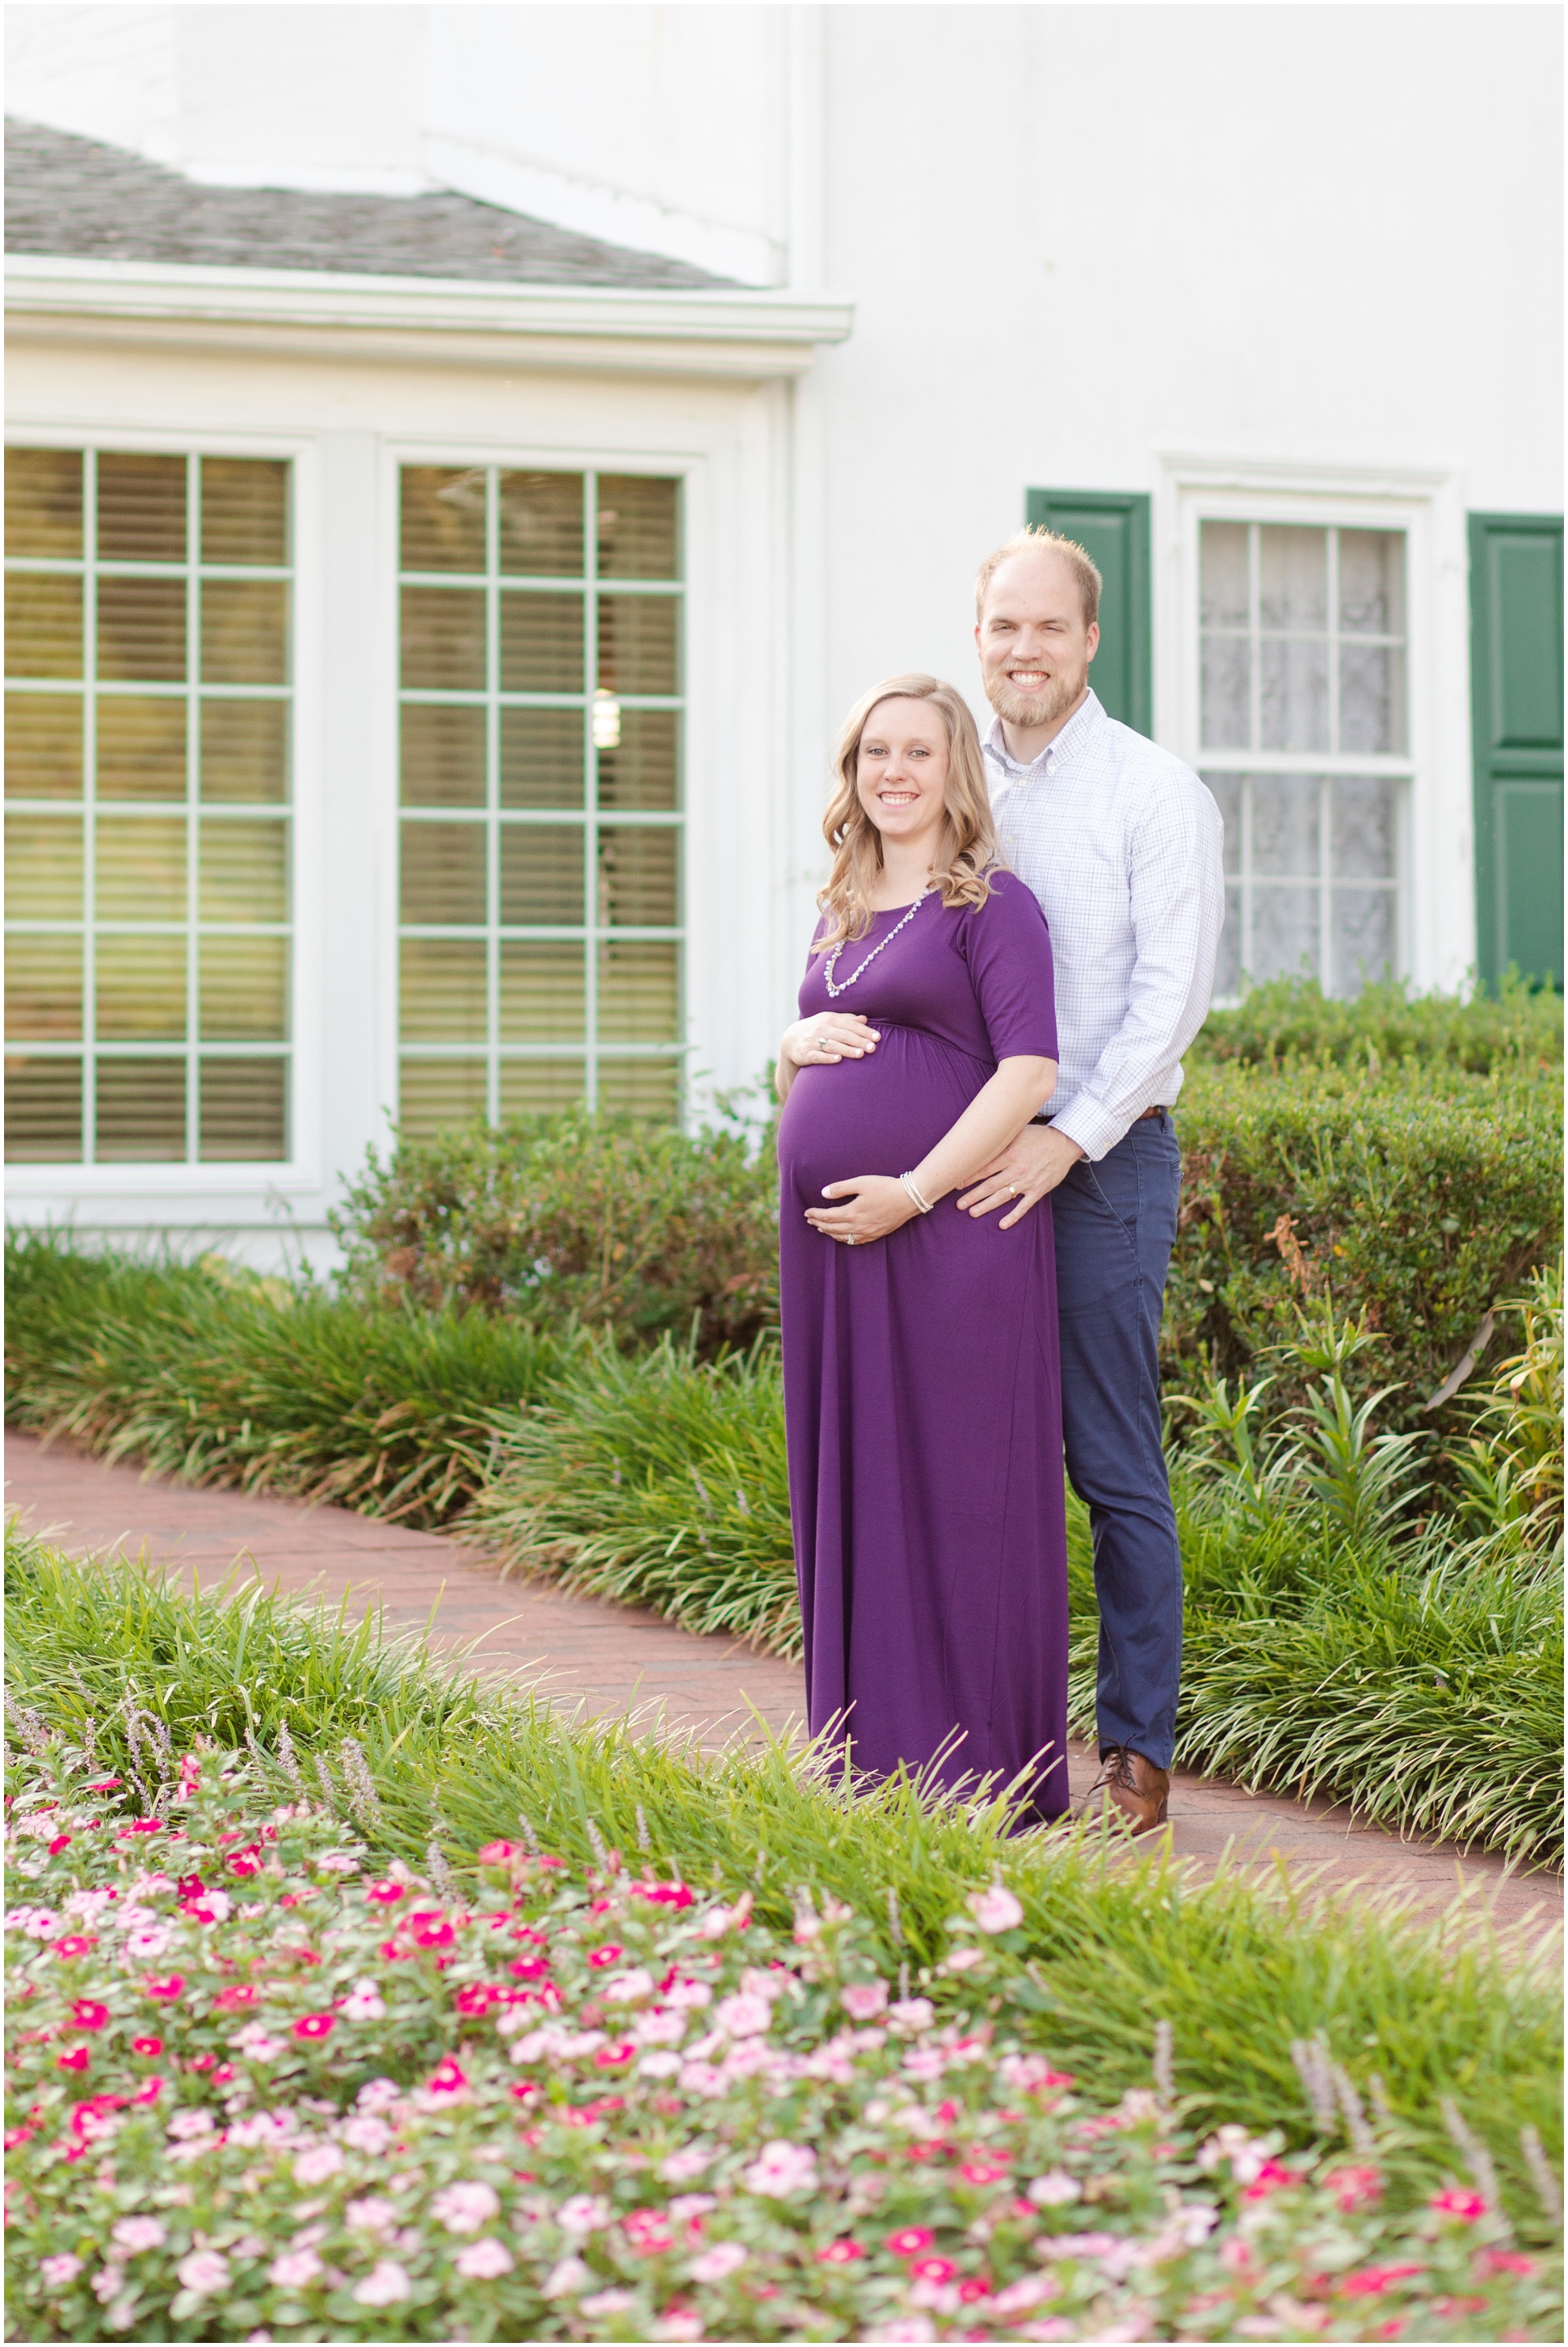 Pregnant woman wearing purple dress and holding her belly, standing in front of her husband